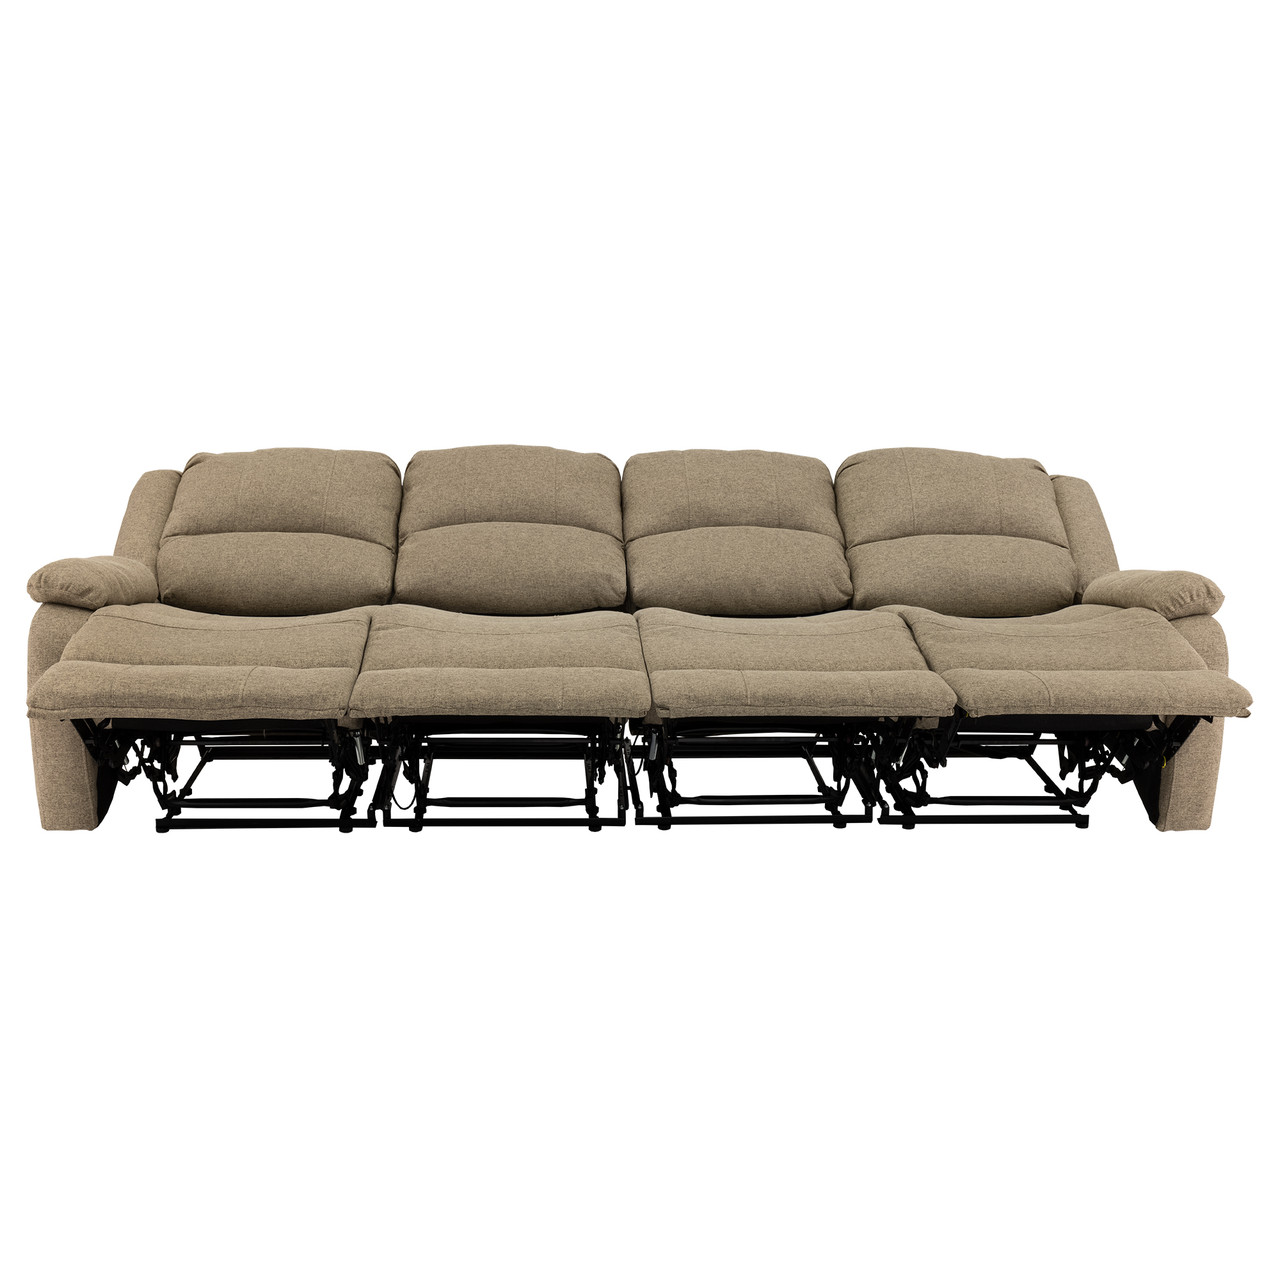 RecPro Charles 102 Quad Wall Hugger RV Recliner Sofa with Two Drop Down  Consoles - RecPro